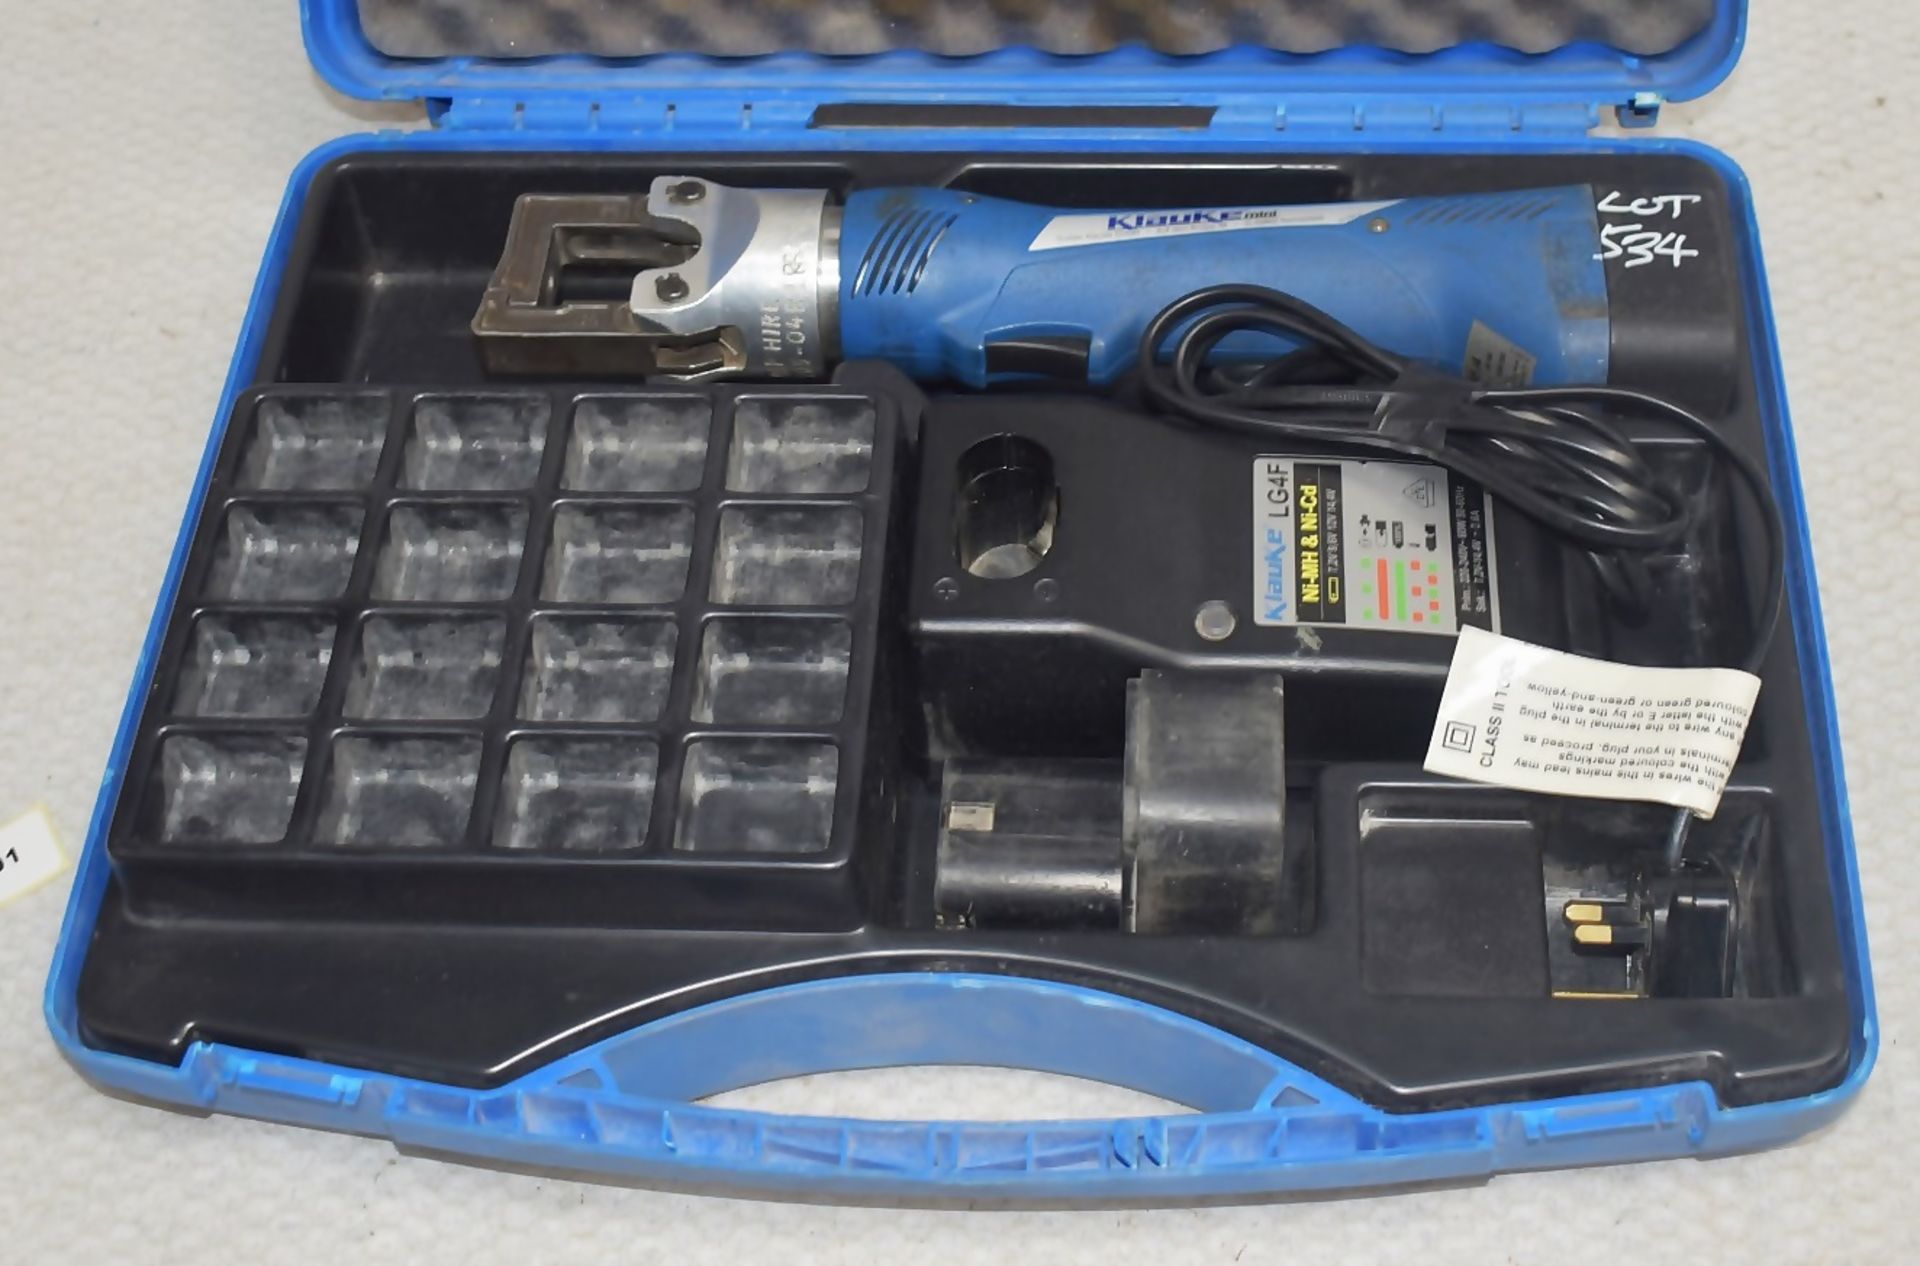 1 x KLAUKE EK 35/4 Battery-Powered Hydraulic Crimping Tool with Battery Charger and Case - Ref: - Image 2 of 4